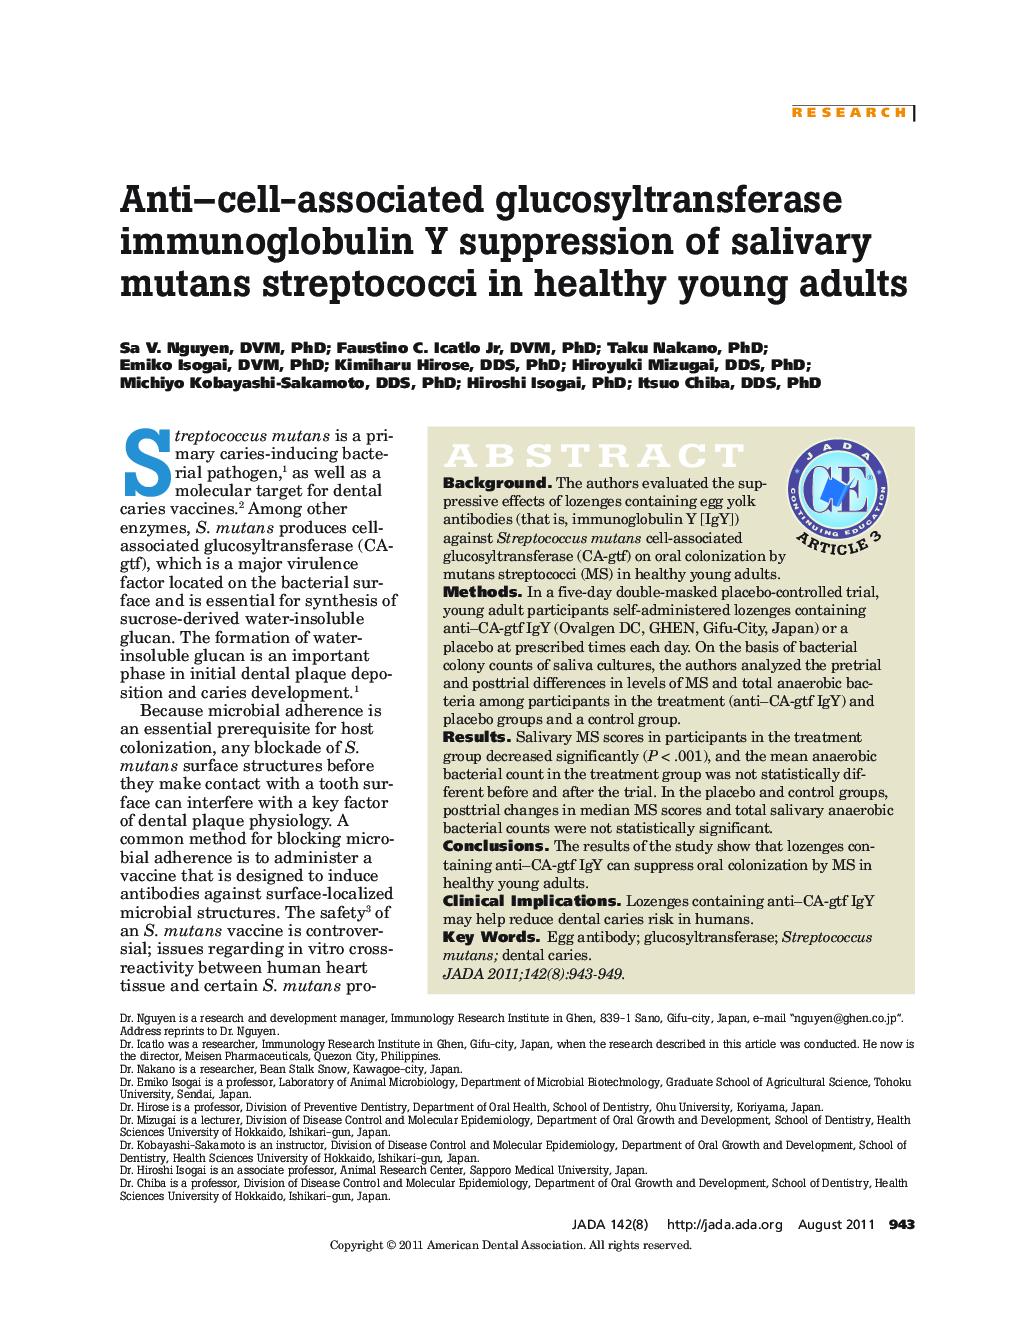 Anti-cell-associated glucosyltransferase immunoglobulin Y suppression of salivary mutans streptococci in healthy young adults